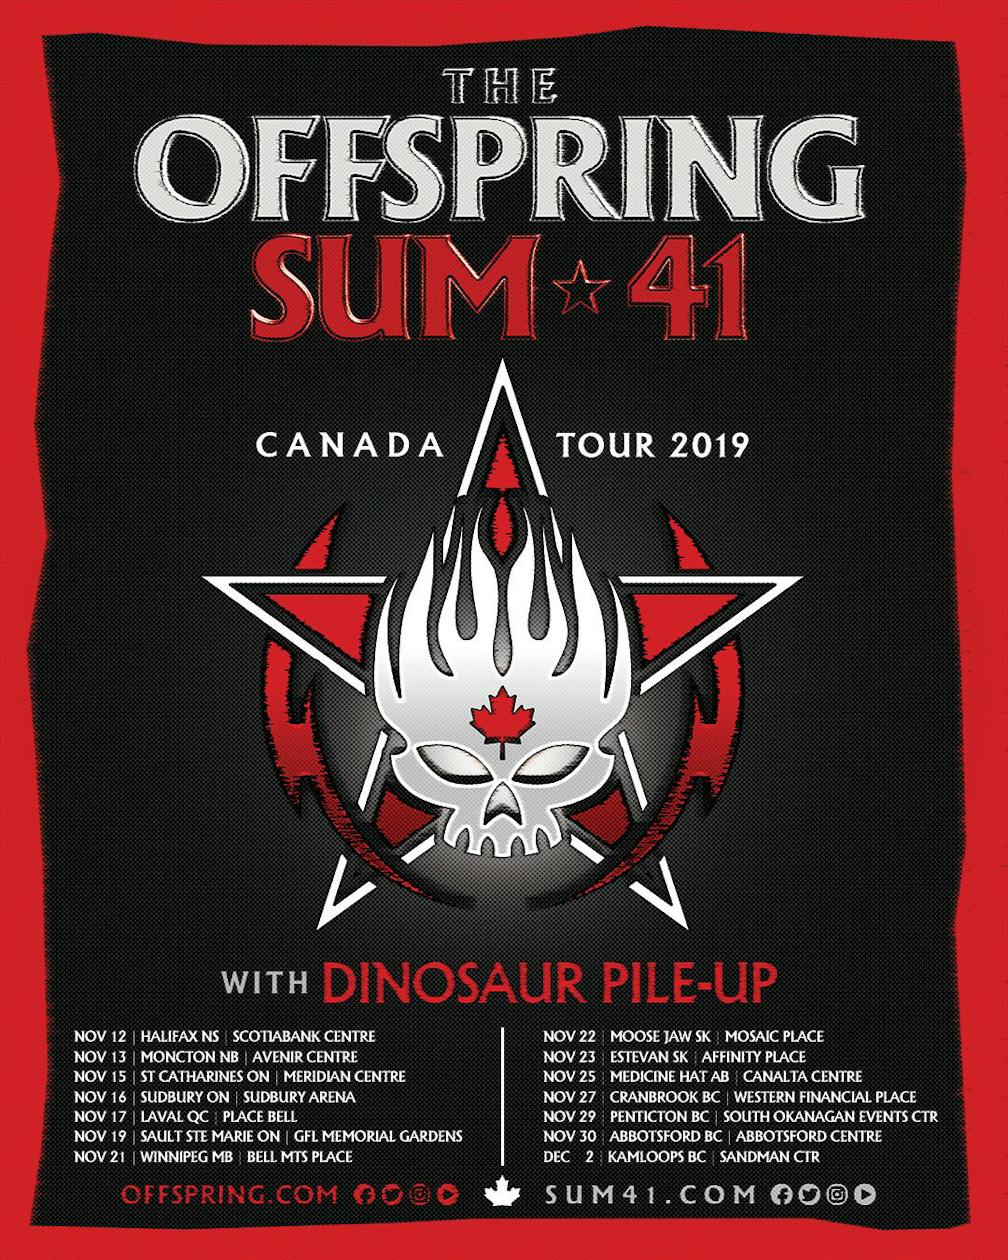 sum 41 and offspring tour